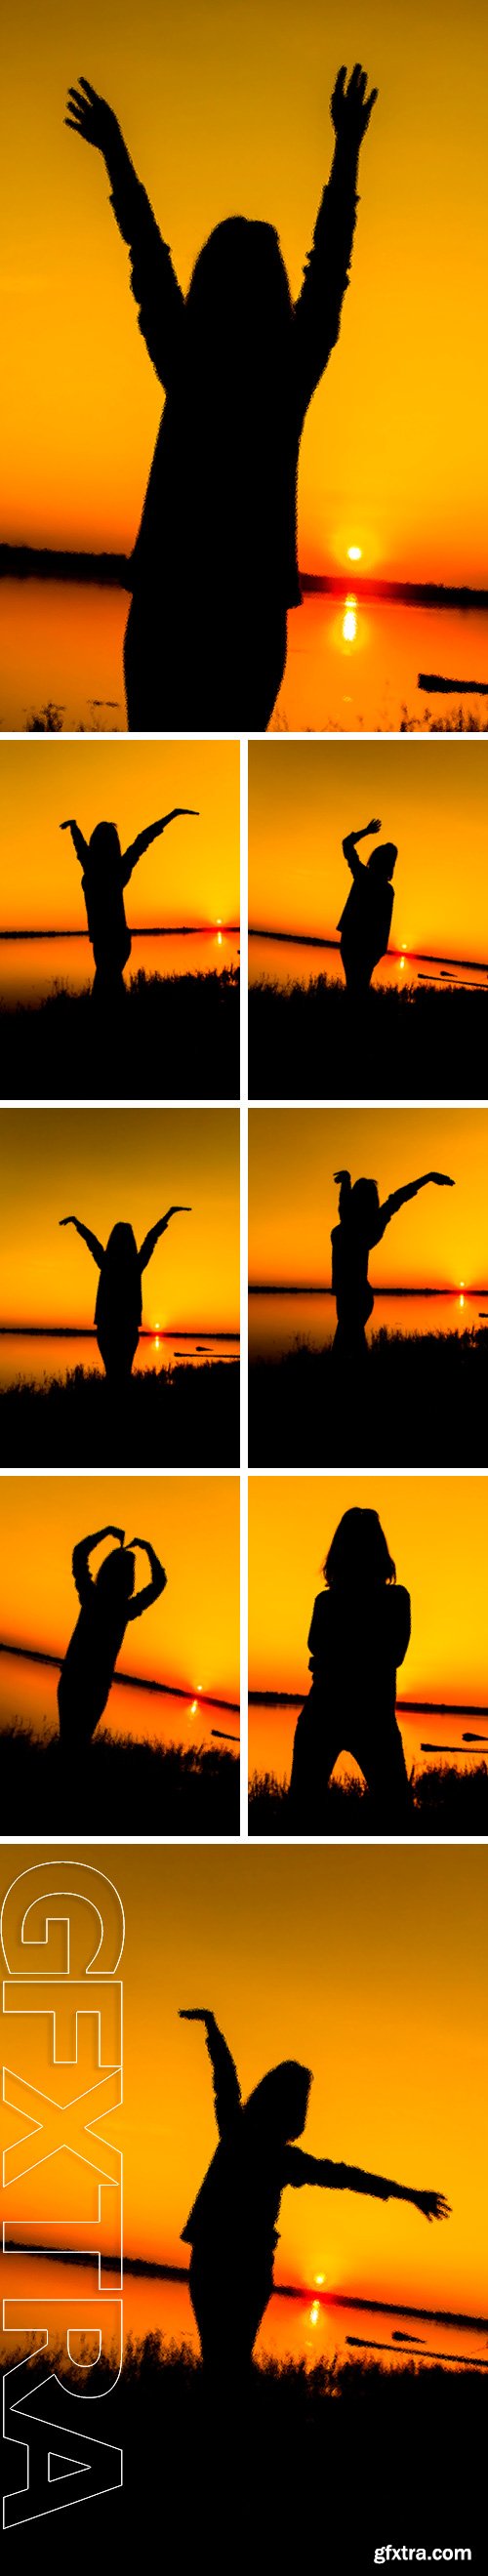 Stock Photos - The silhouette of young girls with Frosted Glass filter